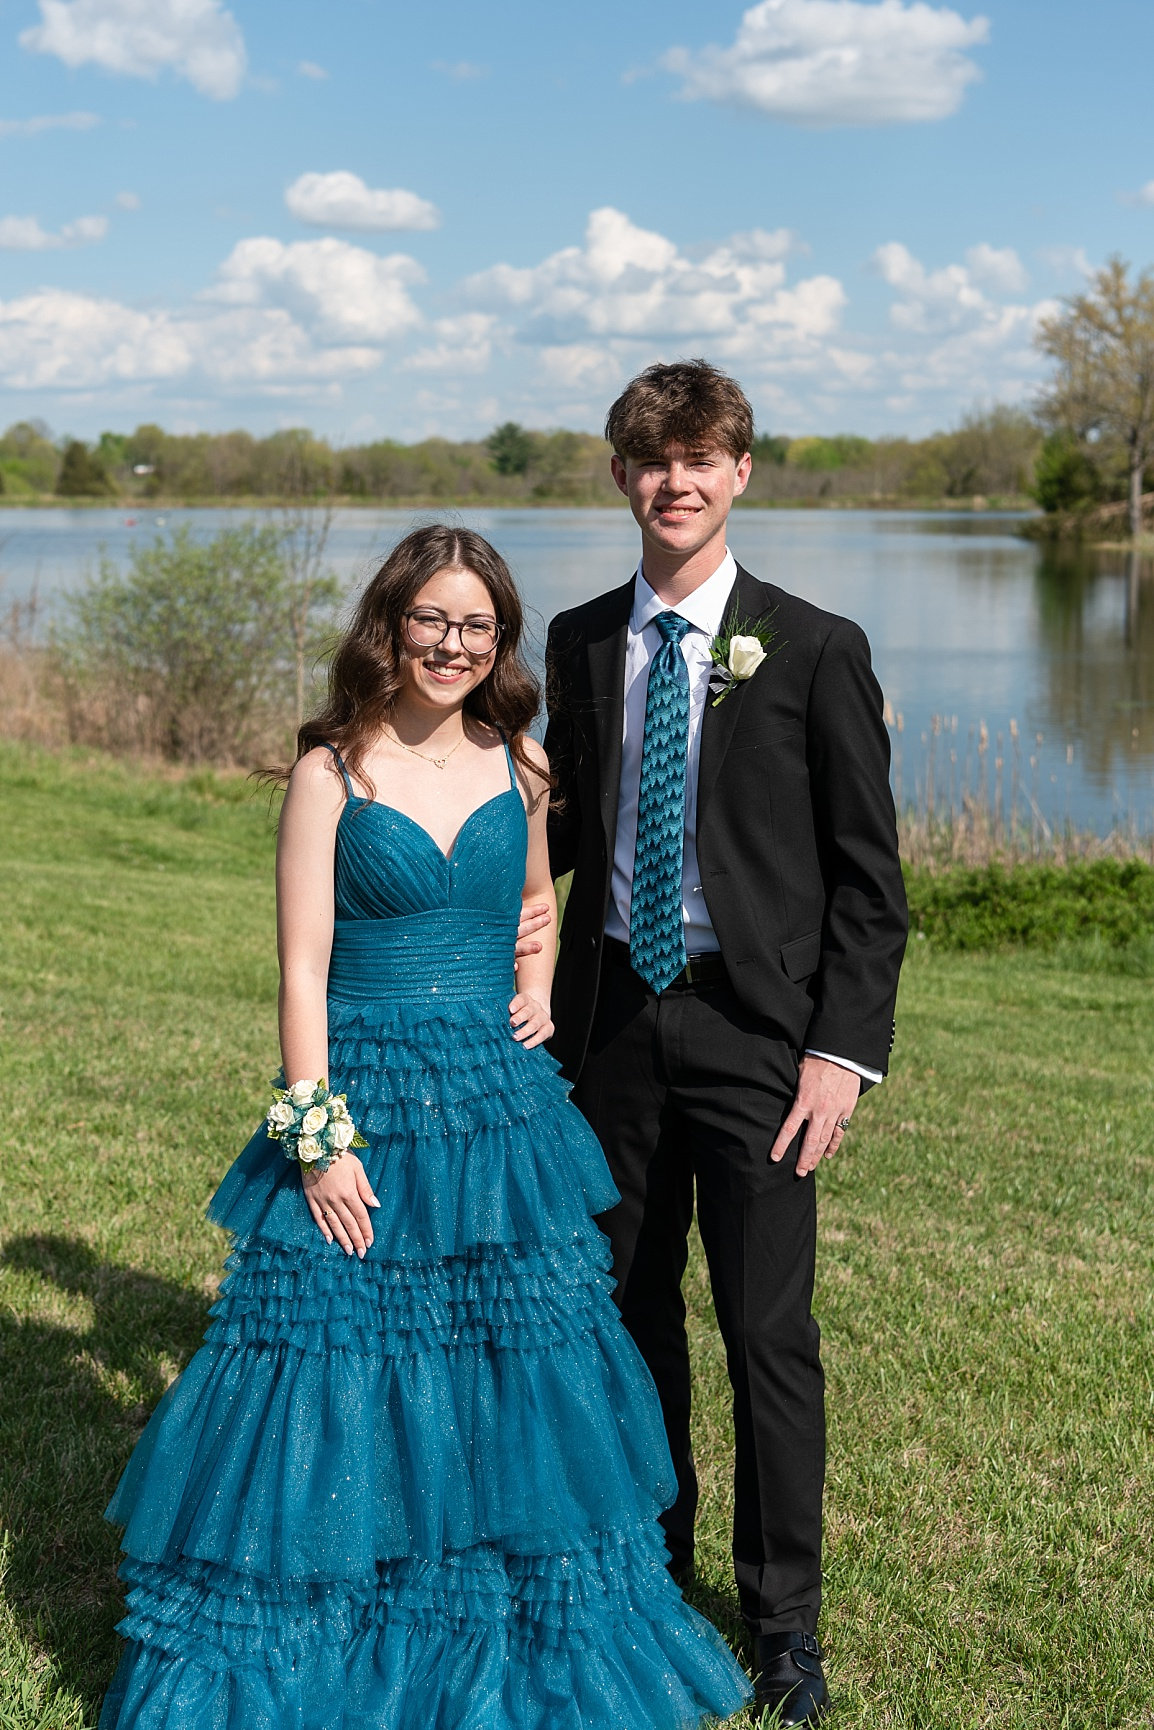 Prom Pictures, Addison Style! - Addison Photography